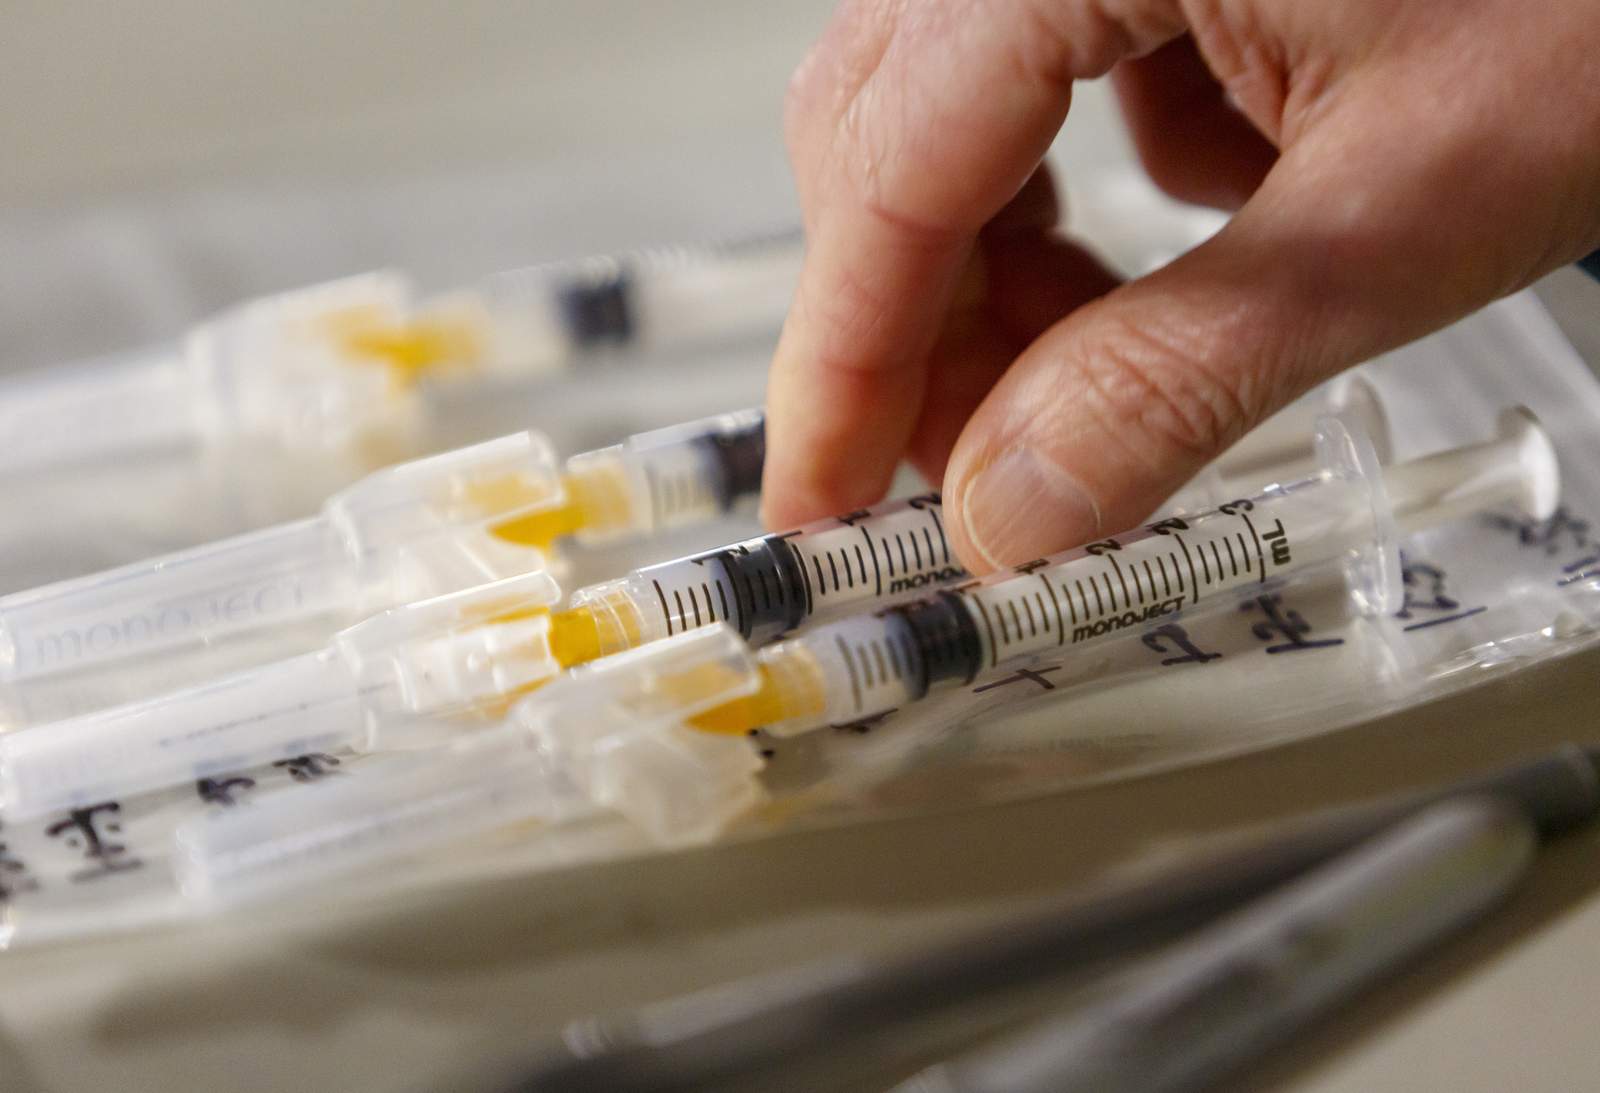 Michigan can vaccinate 80,000 a day, but supply limited